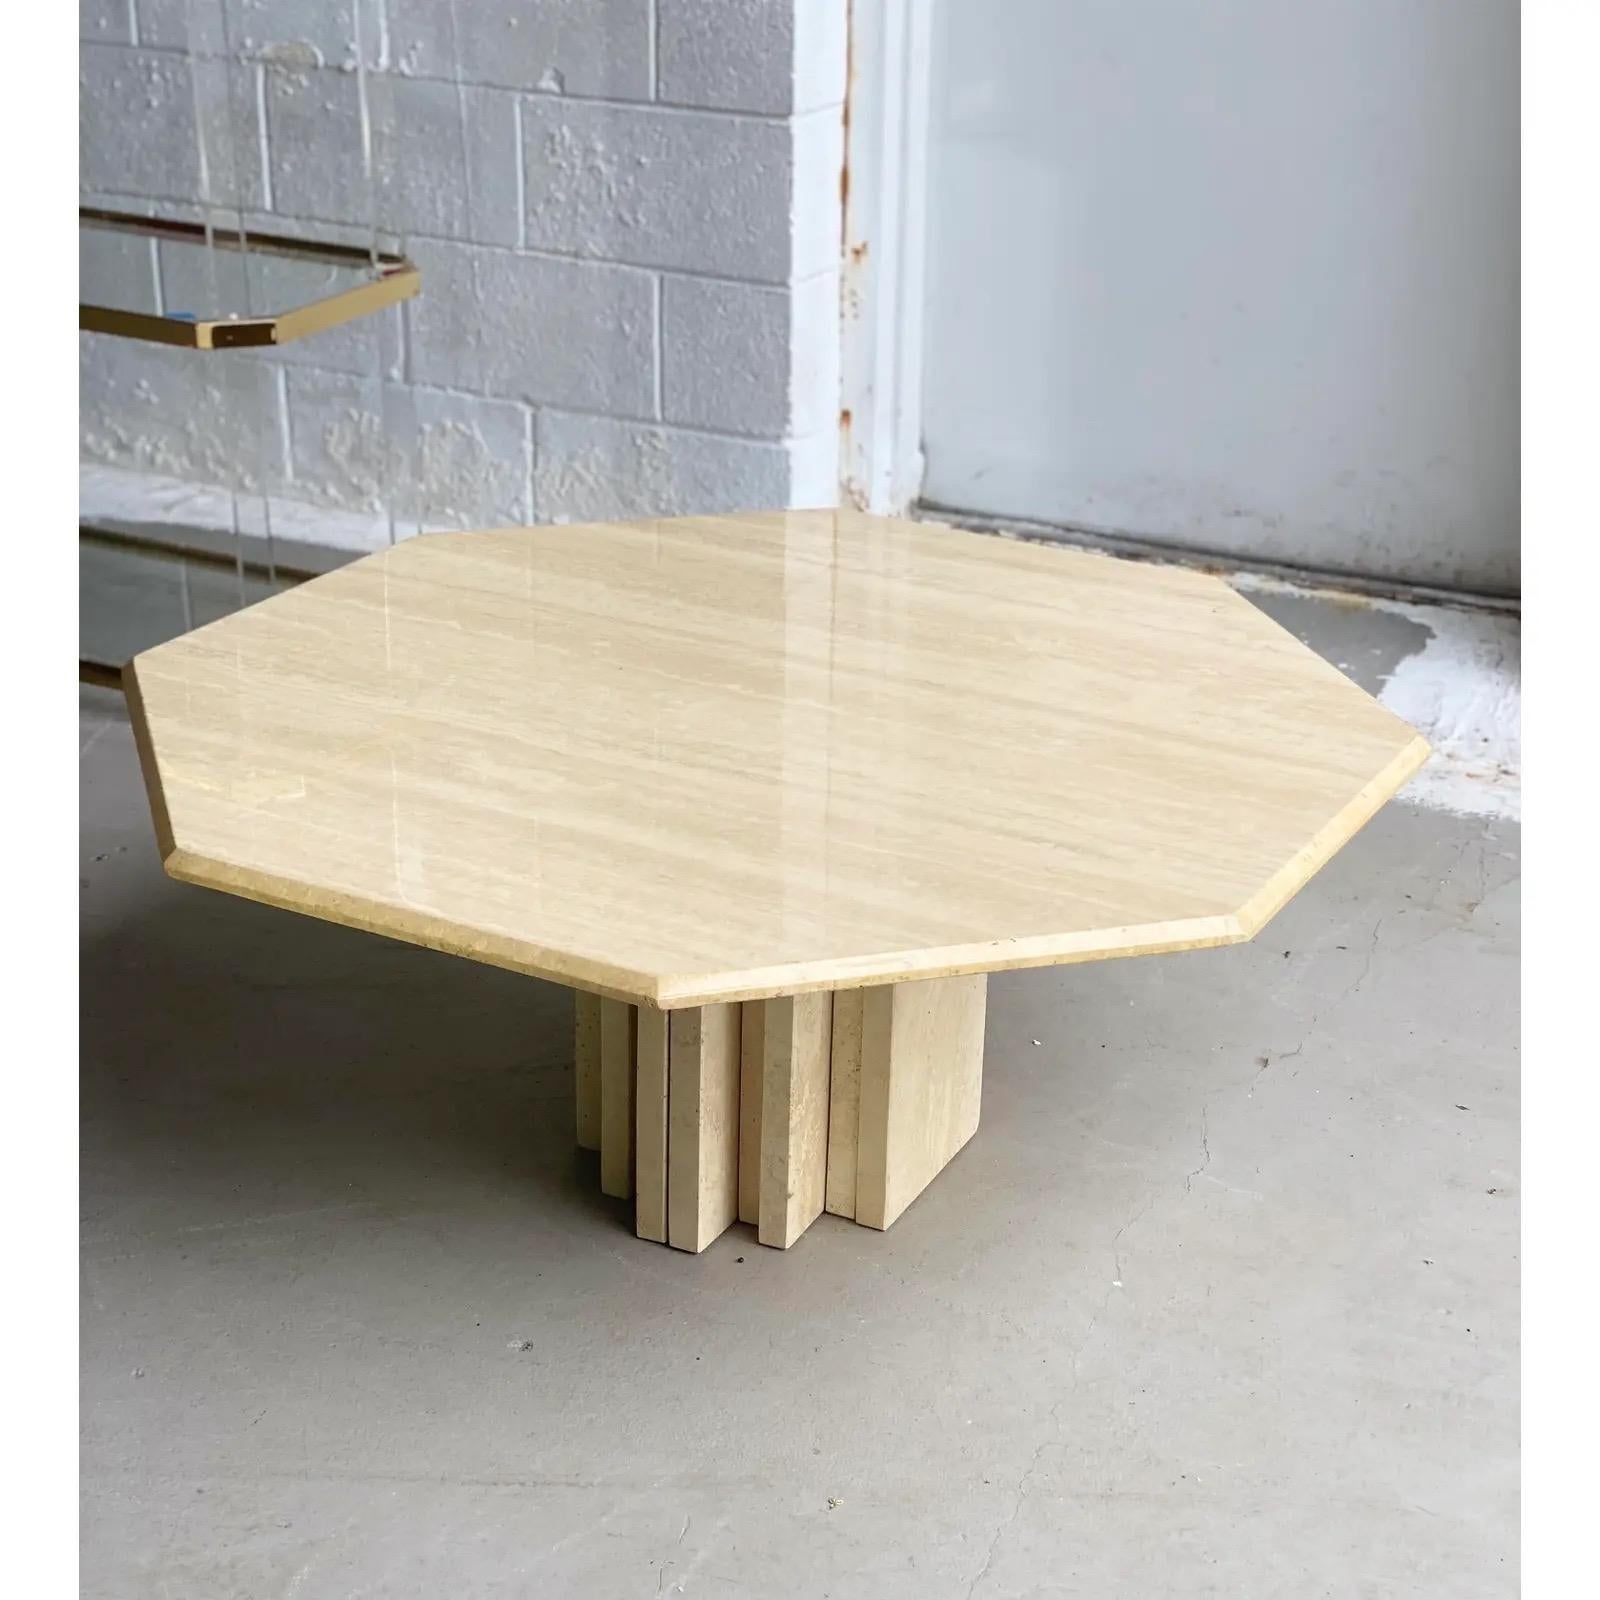 We are very pleased to offer a sculptural, travertine coffee table, made in Italy, circa the 1970s. This beautiful, architectural piece showcases a honed stacked pedestal base and a large lacquered octagonal tabletop, this juxtaposition of form and